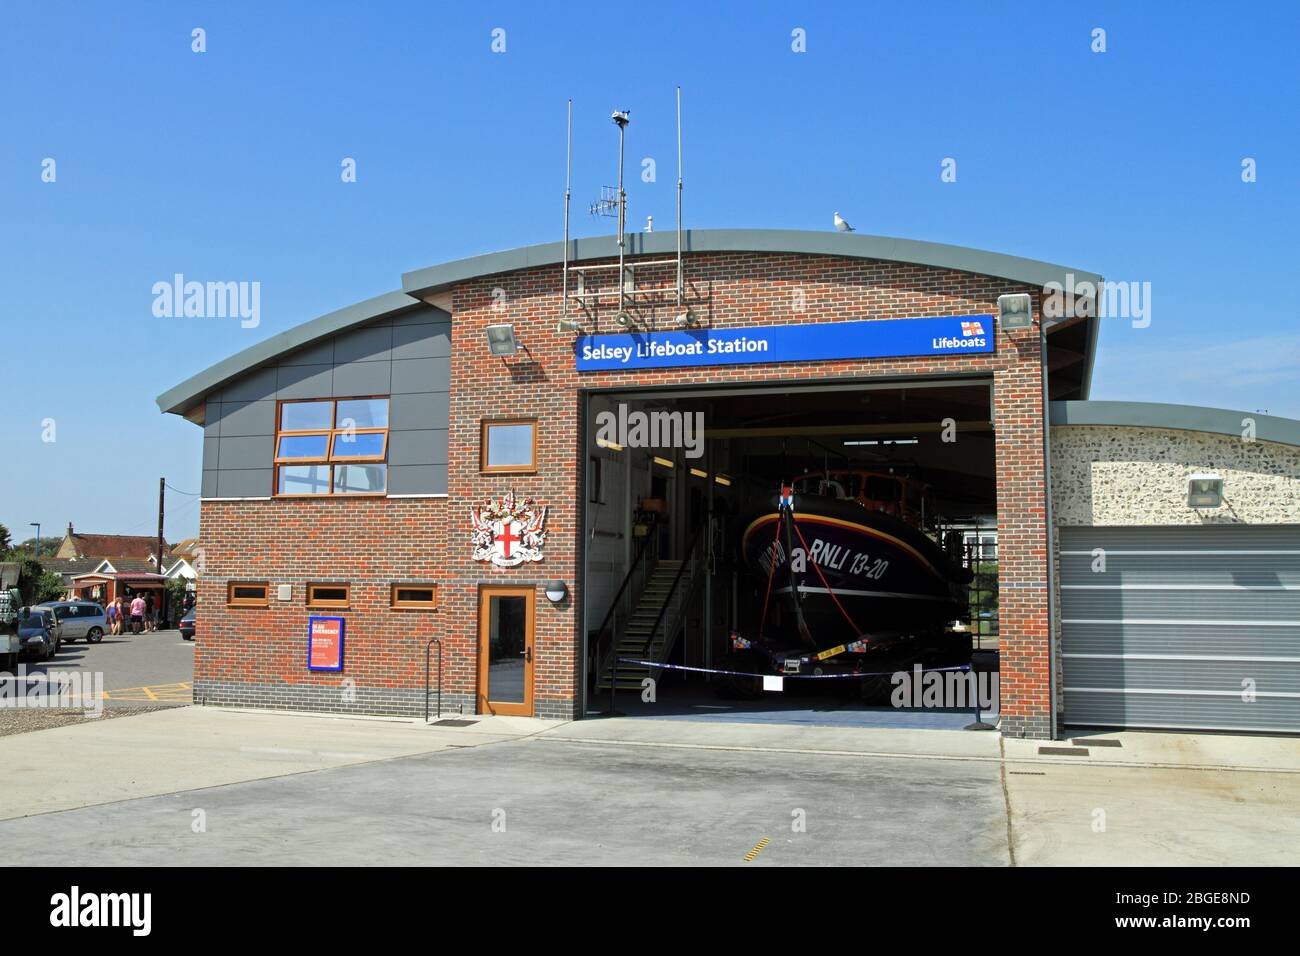 Selsey Lifeboat Station, Selsey, West Sussex, Angleterre. Banque D'Images